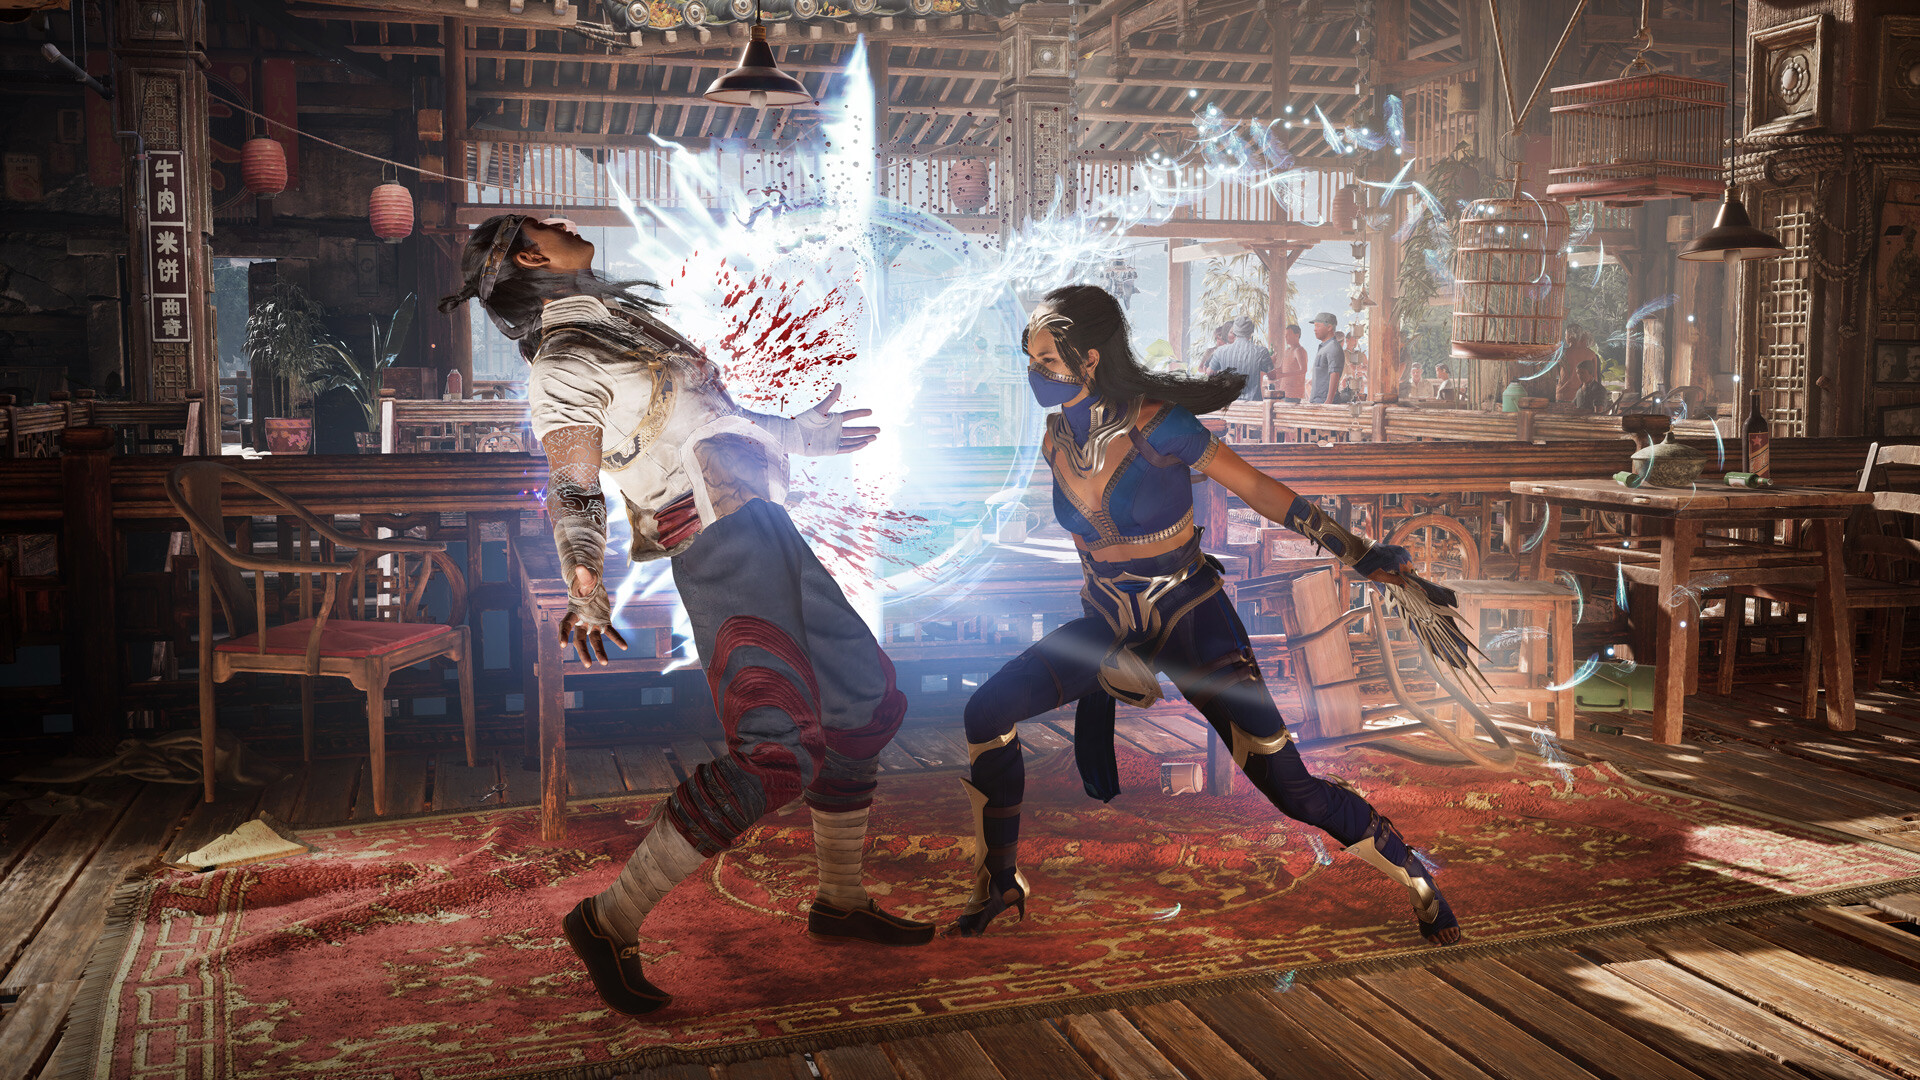 Mortal Kombat 1 Reboot: Everything You Need to Know About the New